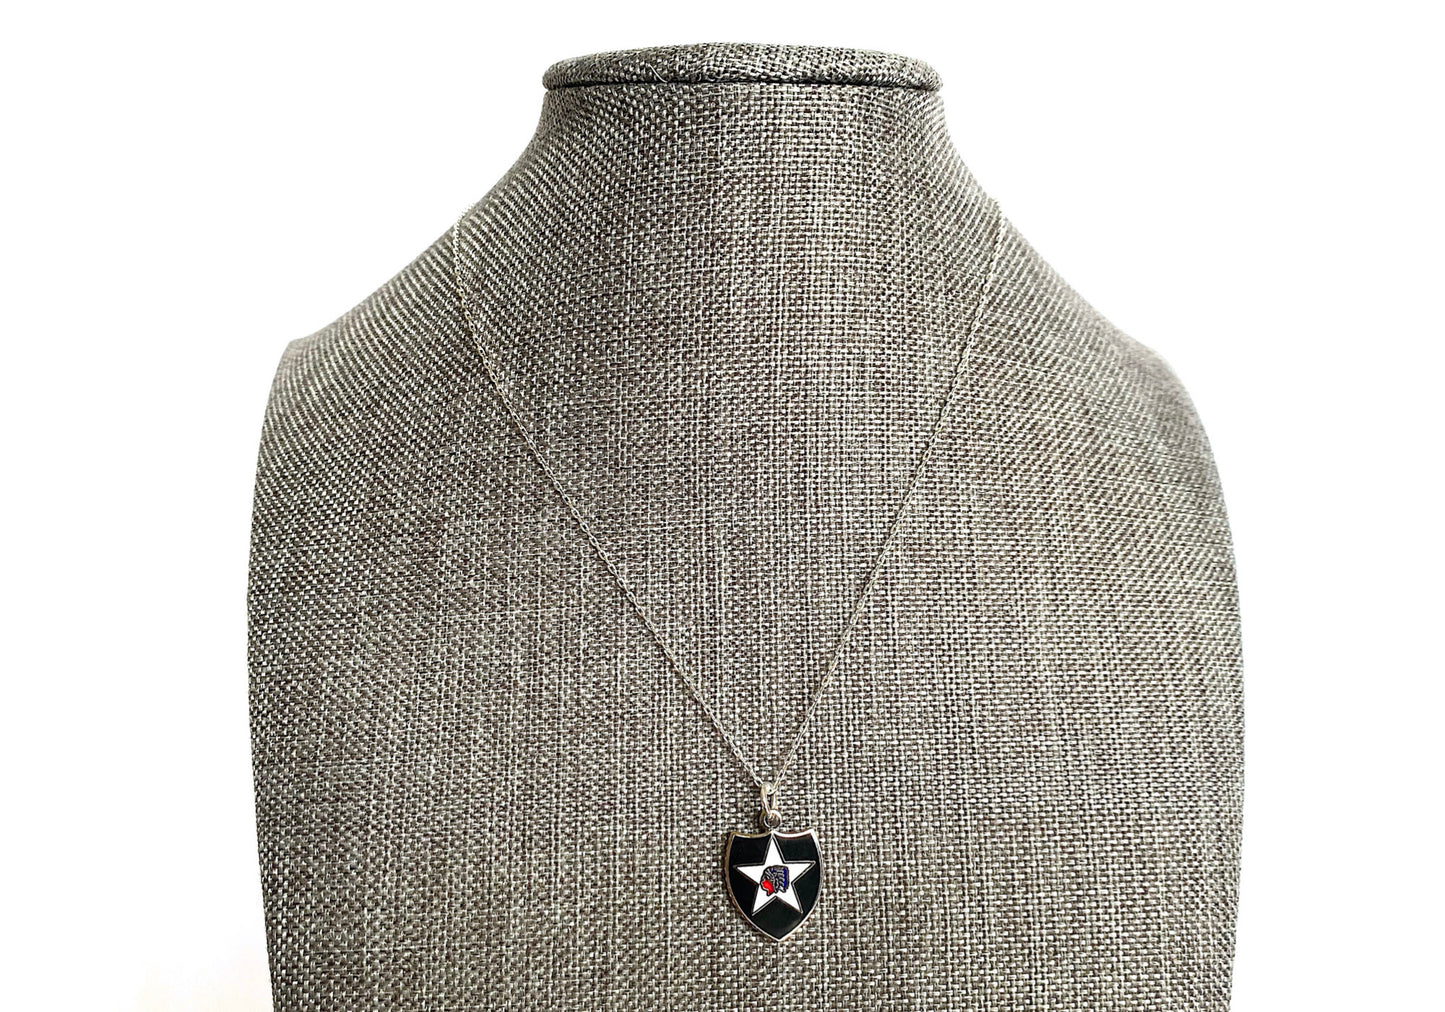 2nd Infantry Division Charm Necklace